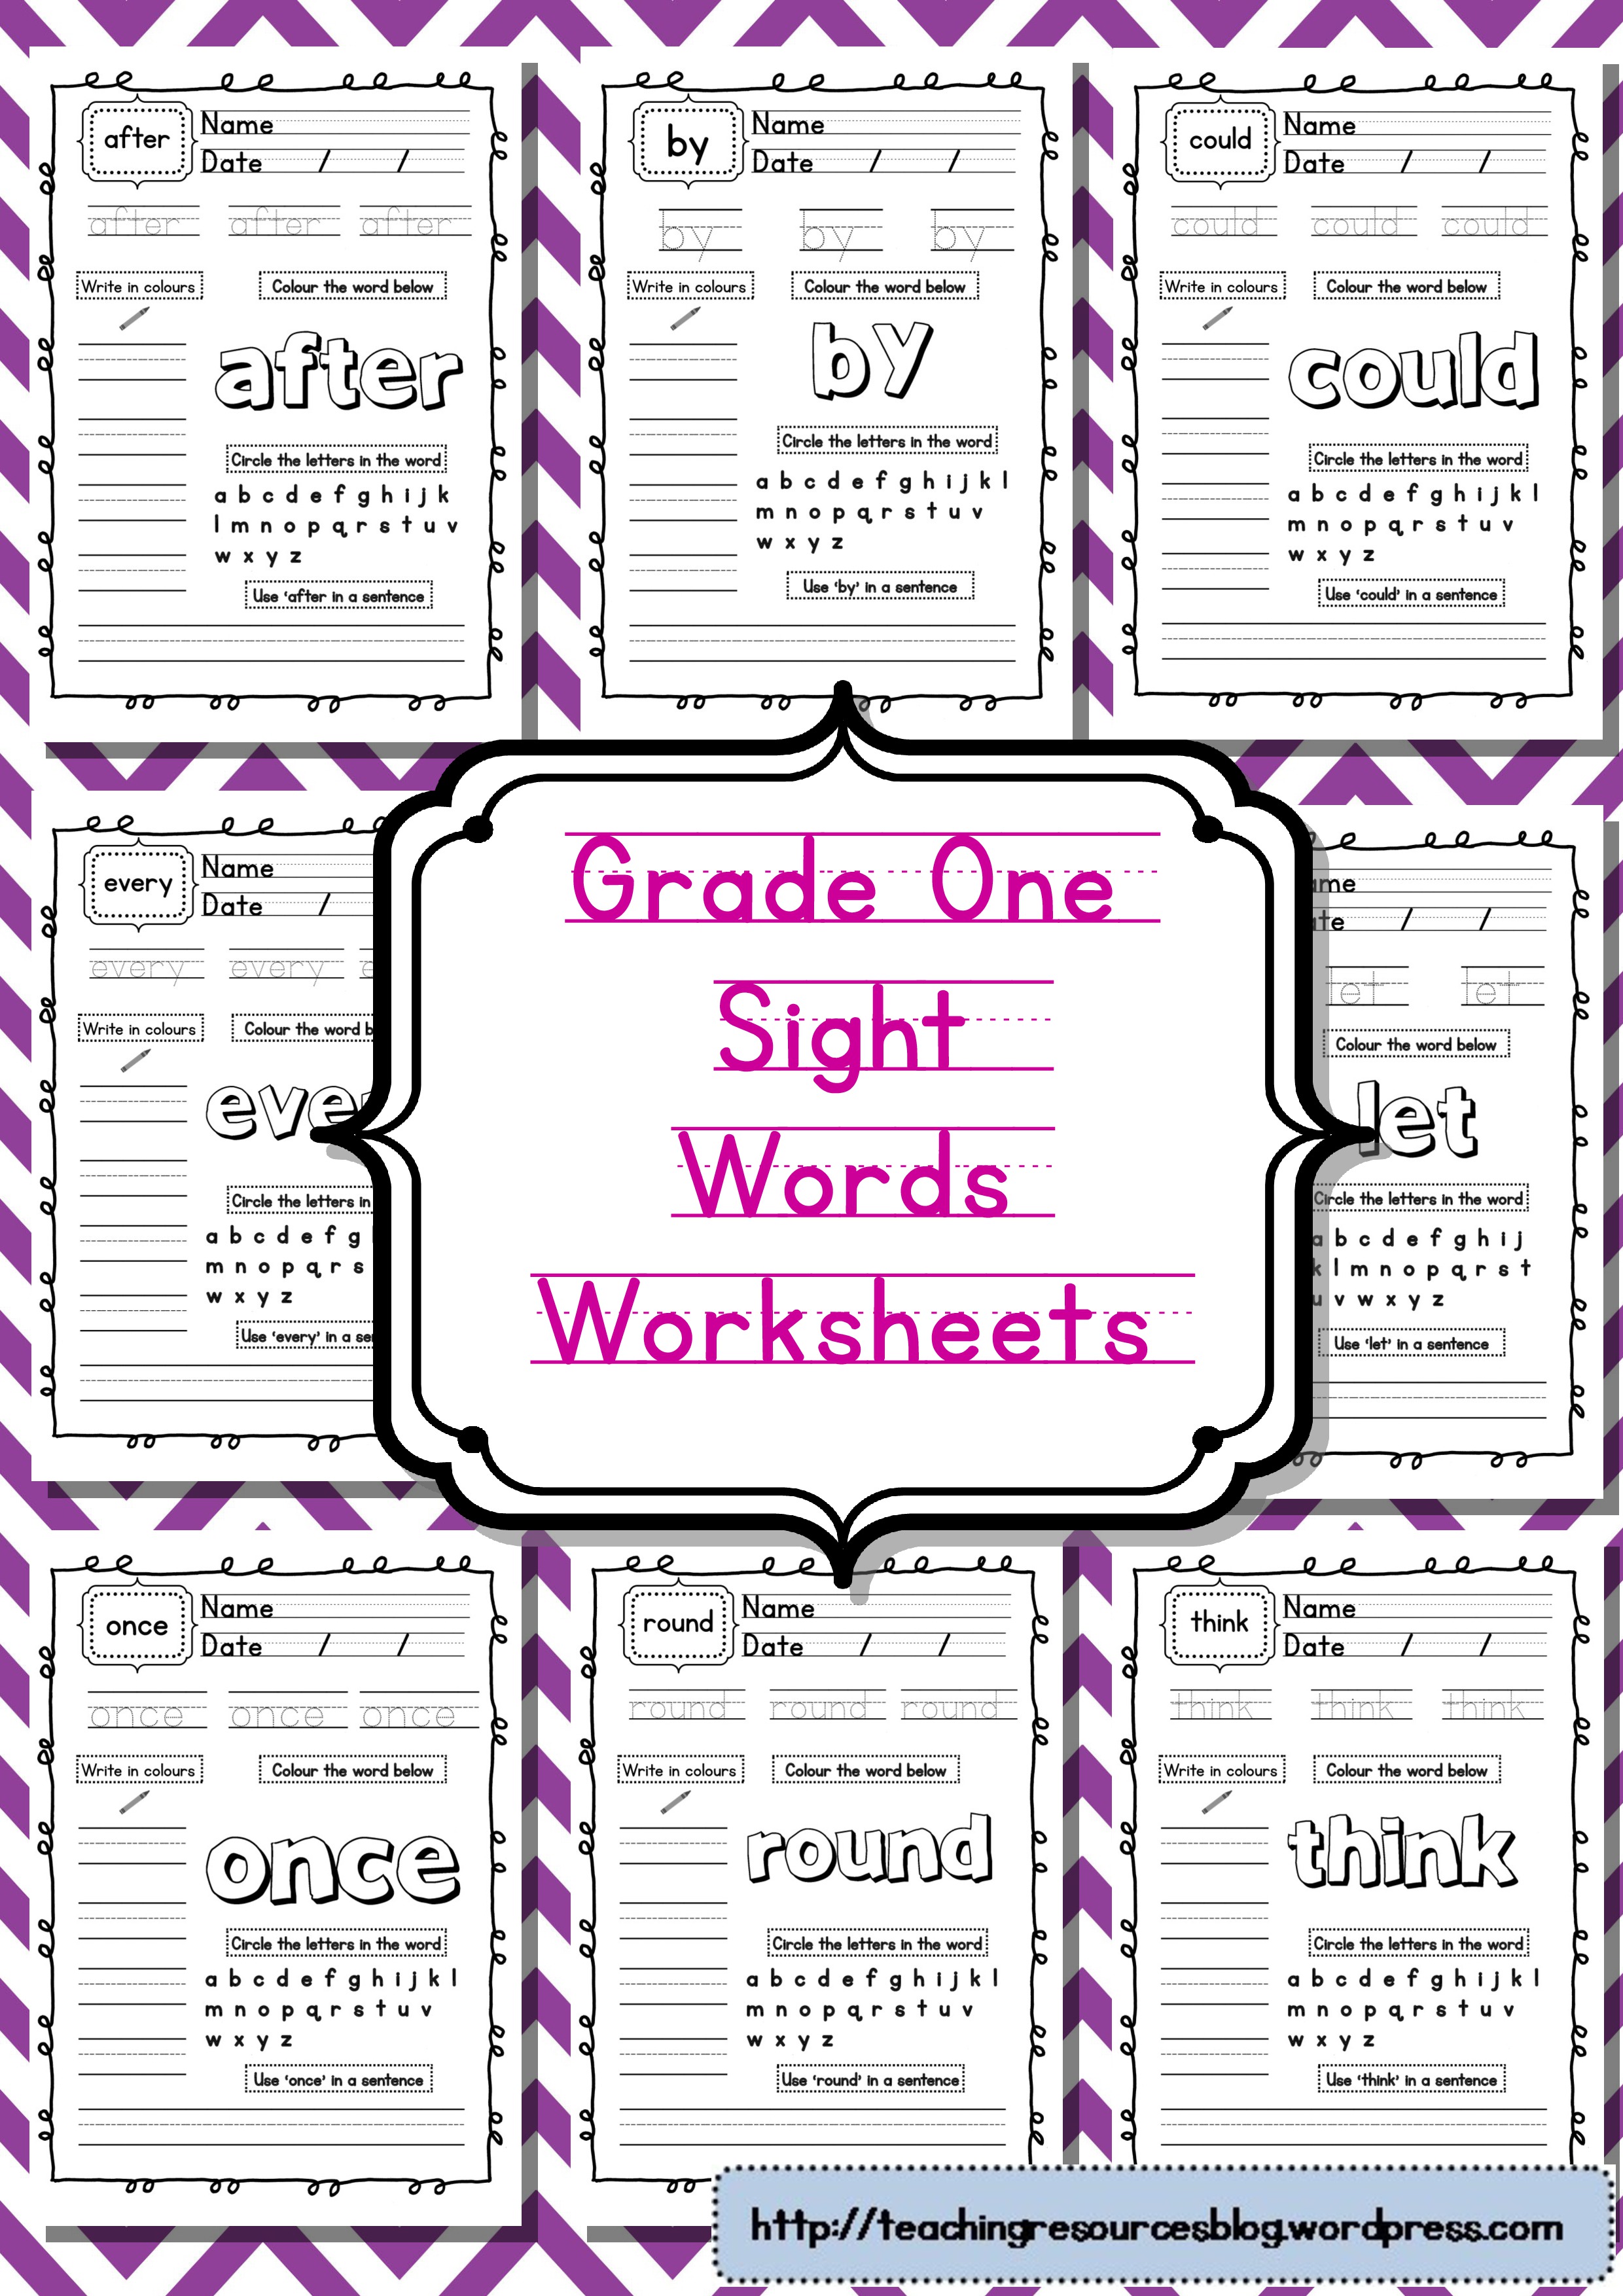 worksheets word 0 in front grade cover fill one words sight page sight